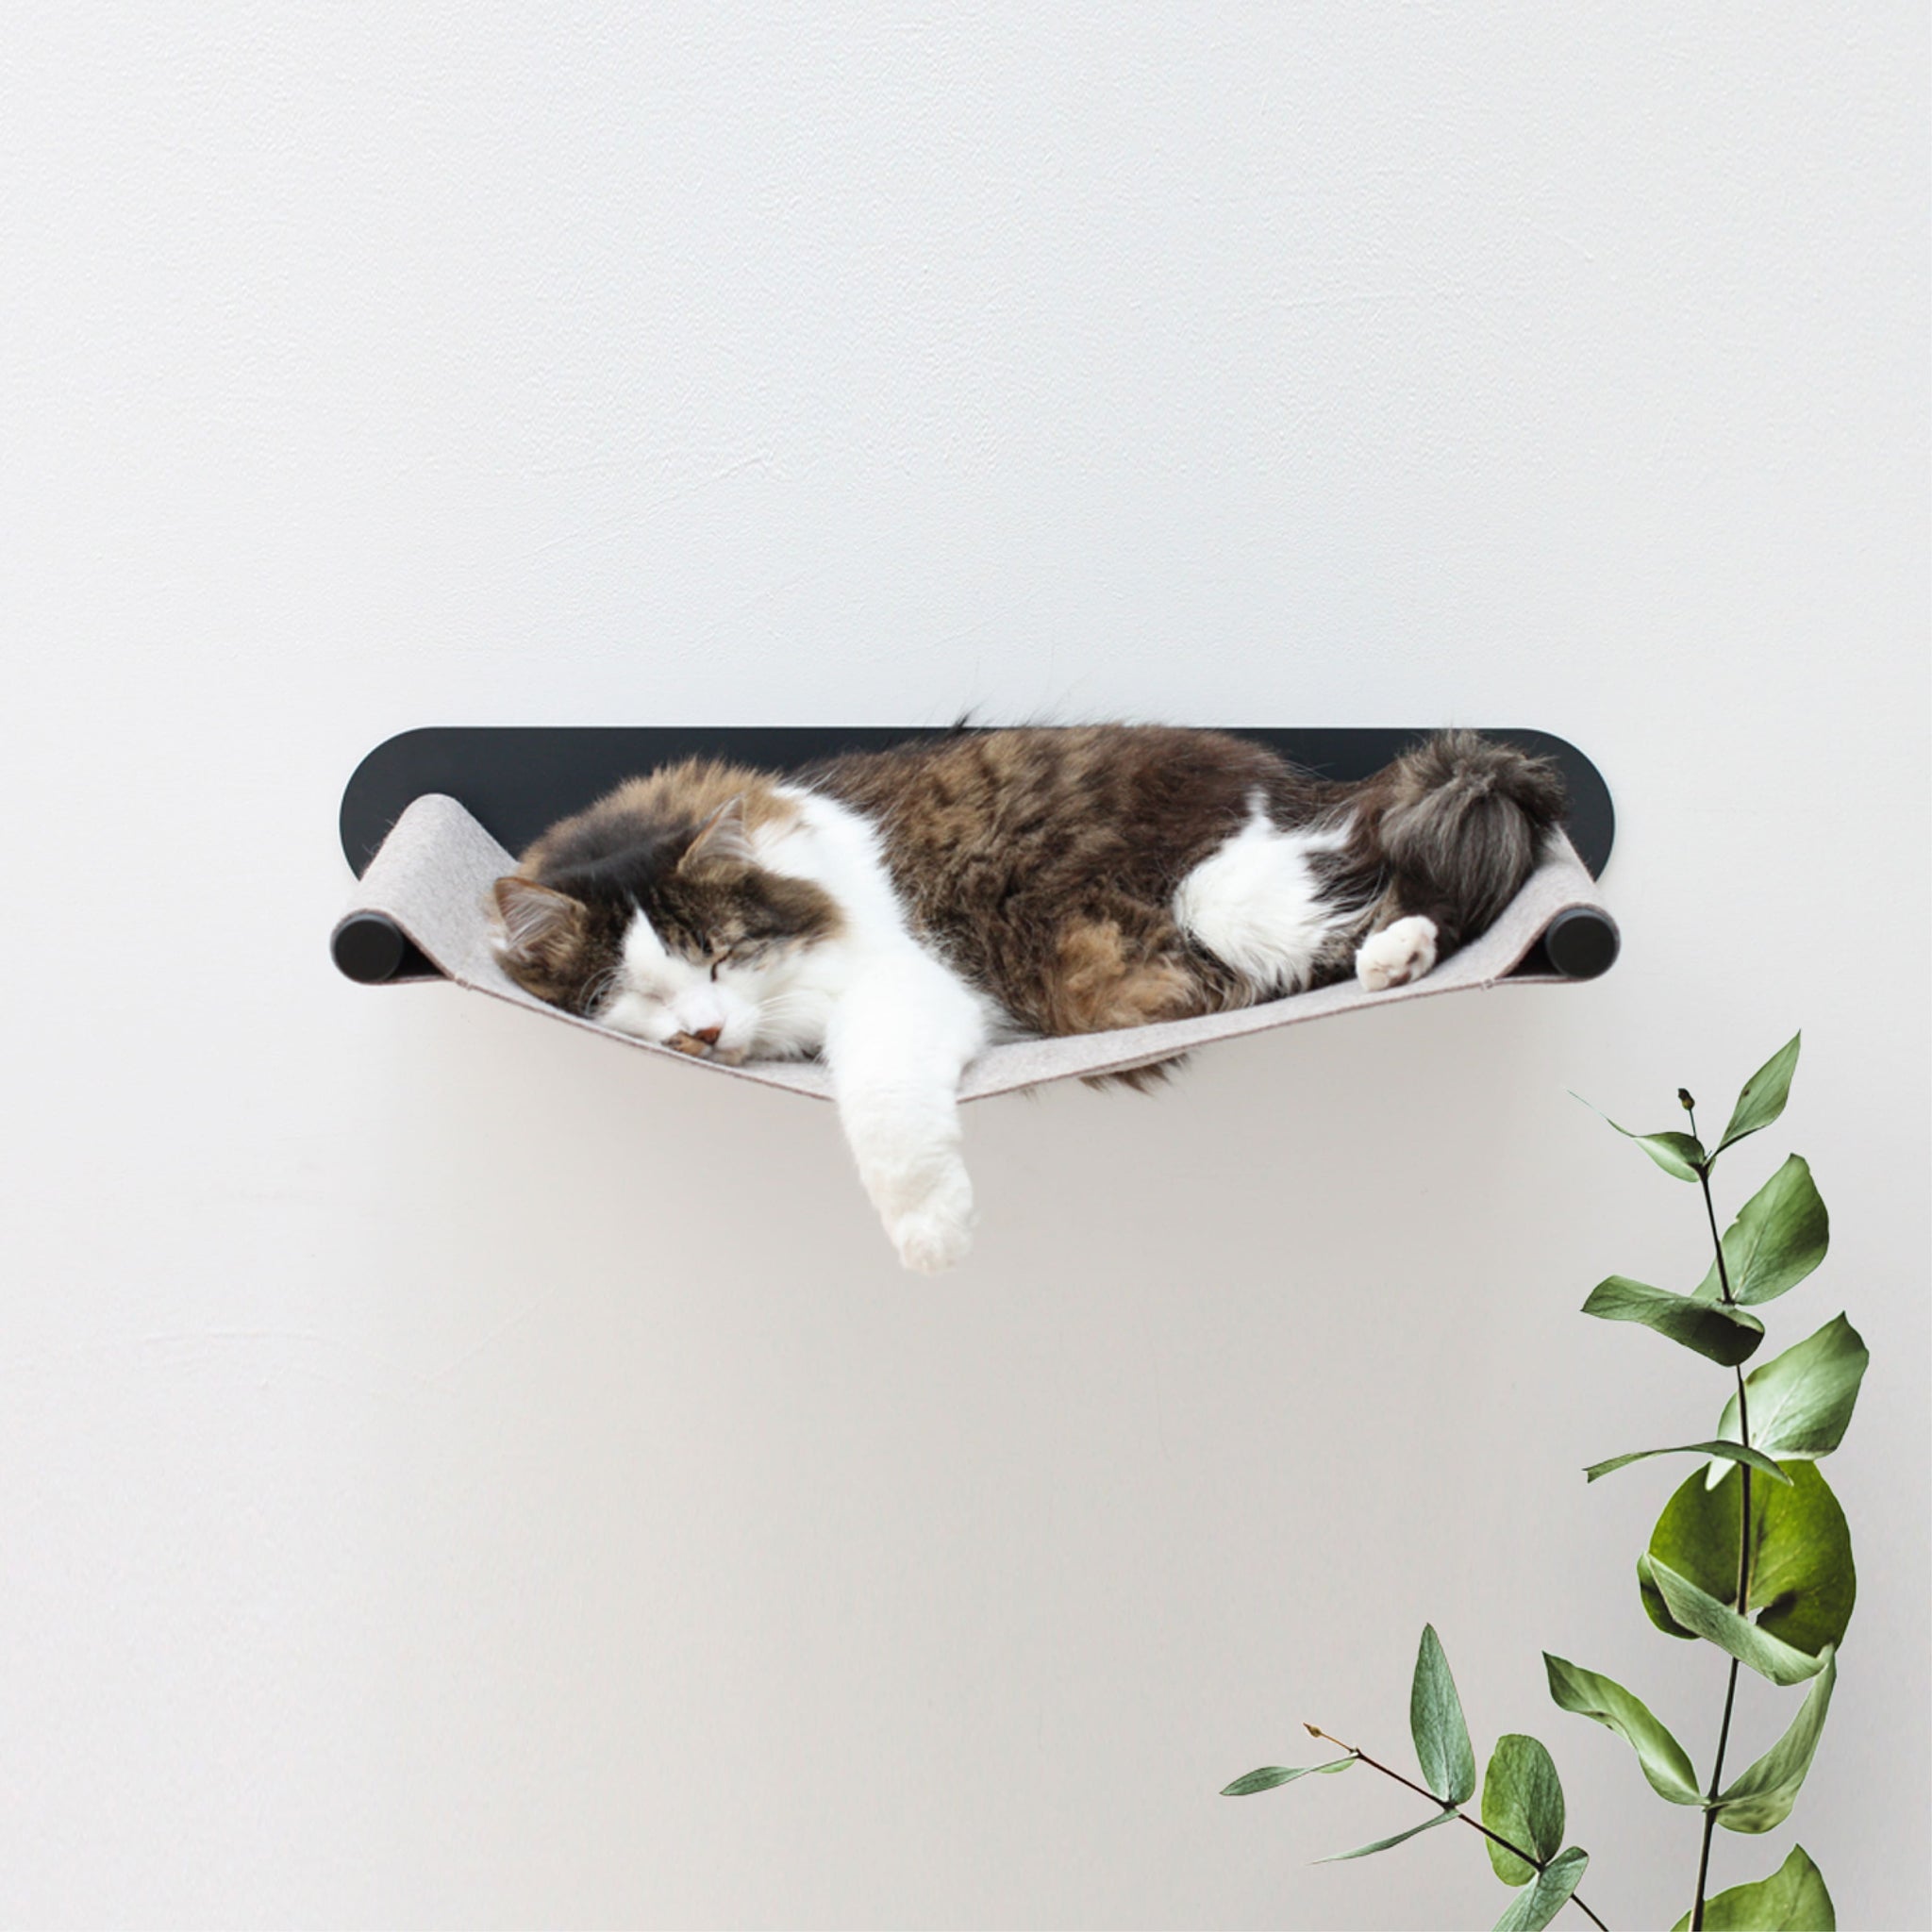 LucyBalu - Collier pour chat pour AirTag